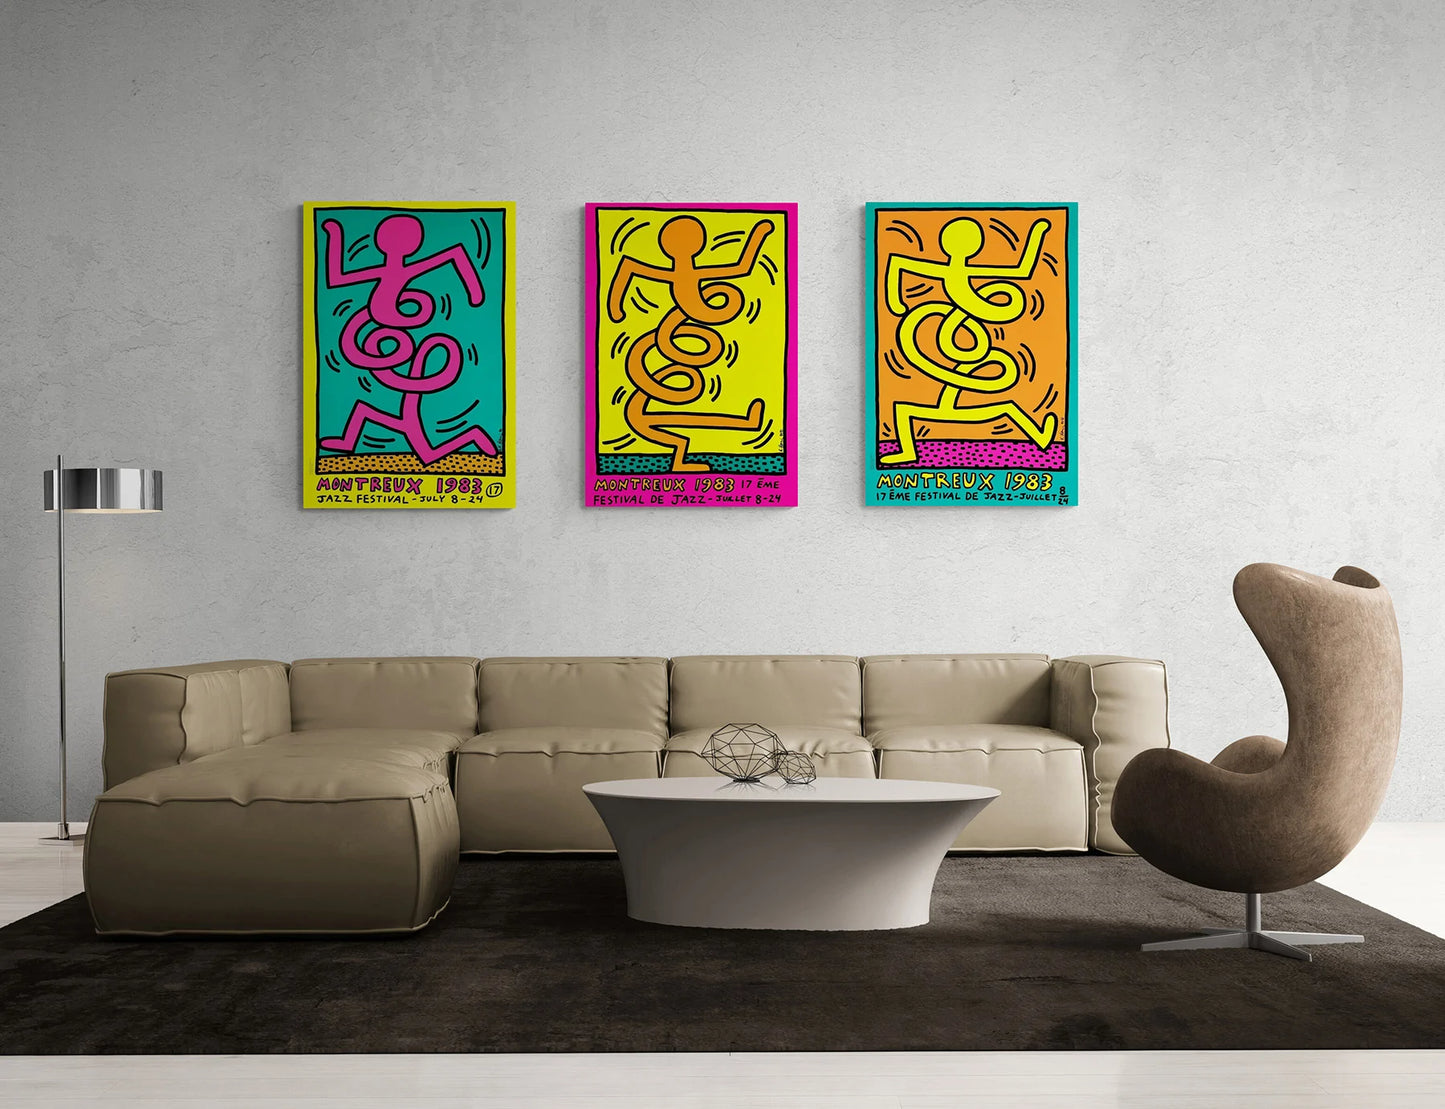 Keith Haring, Montreux Jazz Festival, 1983 (Yellow) - Smolensky Gallery